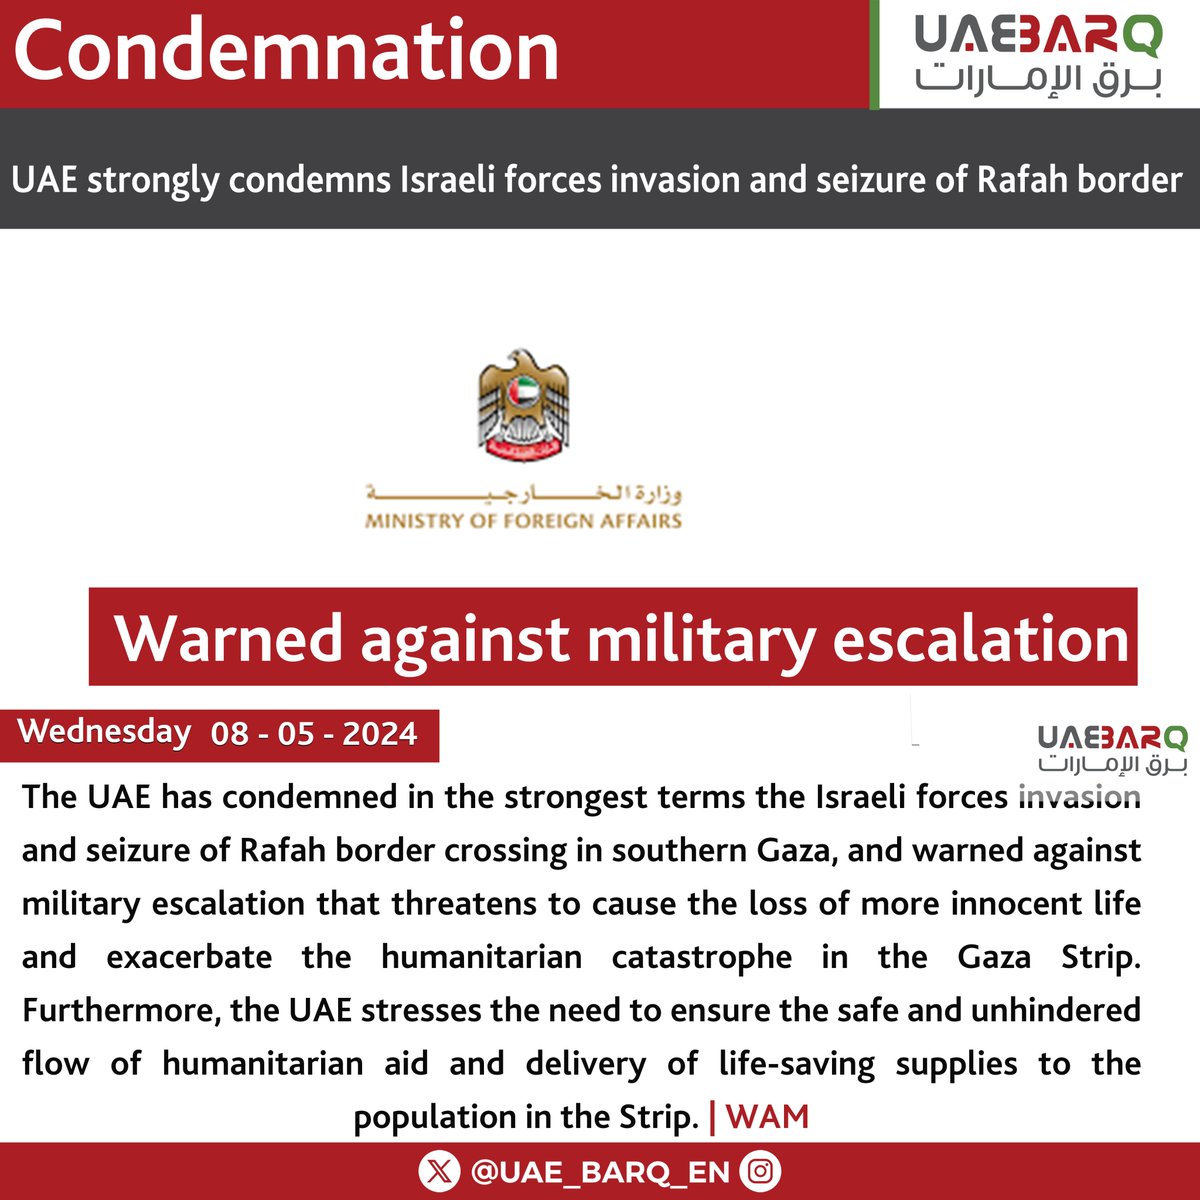 #UAE strongly condemns Israeli forces invasion and seizure of #Rafah border crossing. #UAE_BARQ_EN